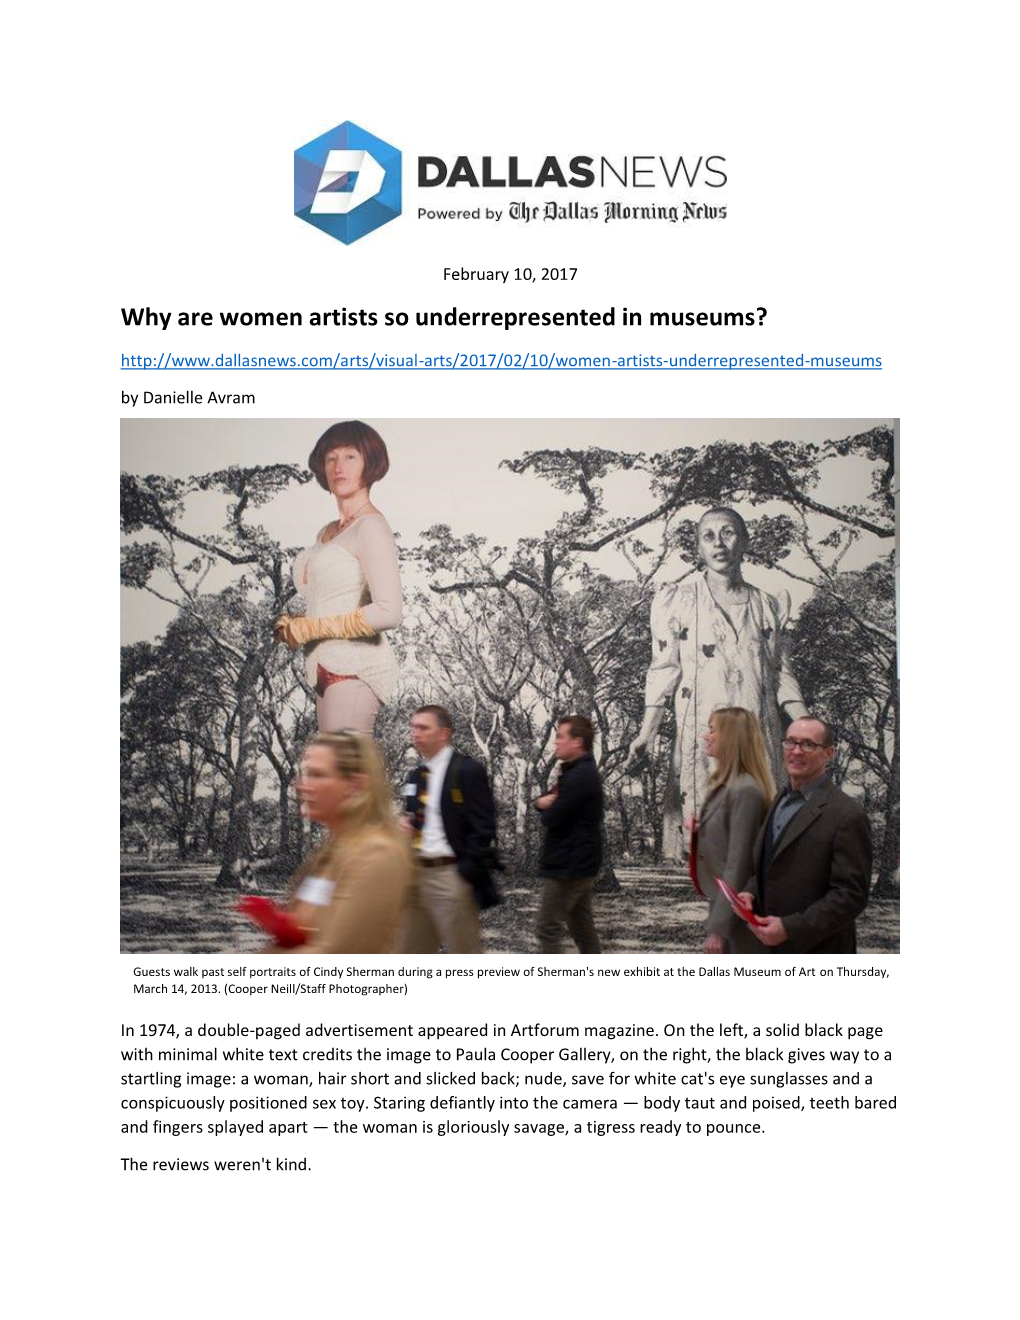 Why Are Women Artists So Underrepresented in Museums? by Danielle Avram